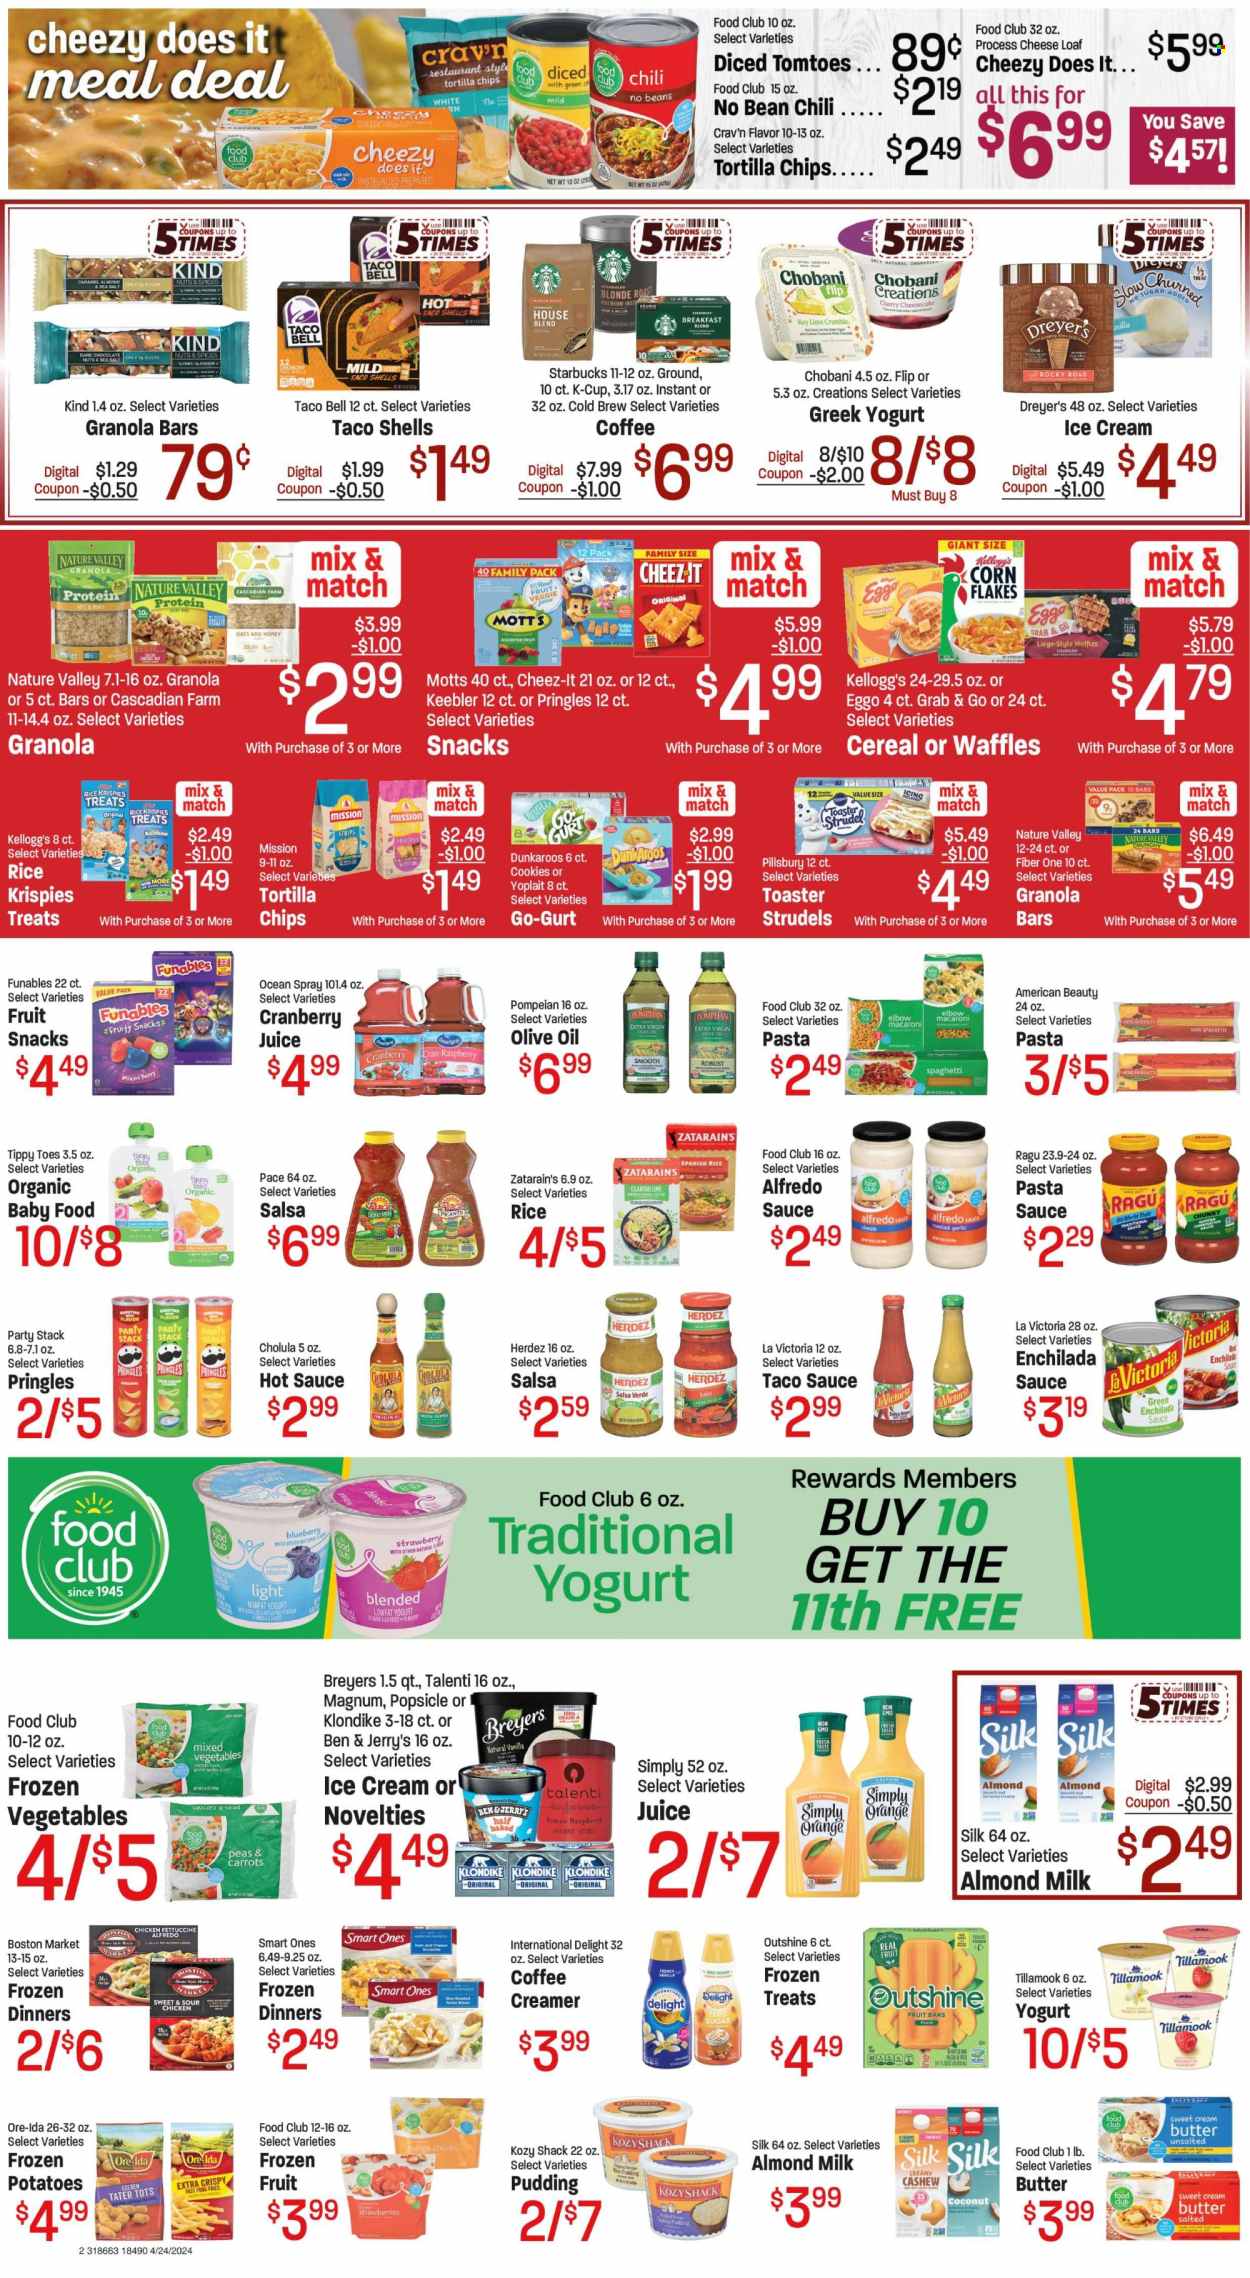 Red Apple Marketplace ad  - 04.24.2024 - 04.30.2024.